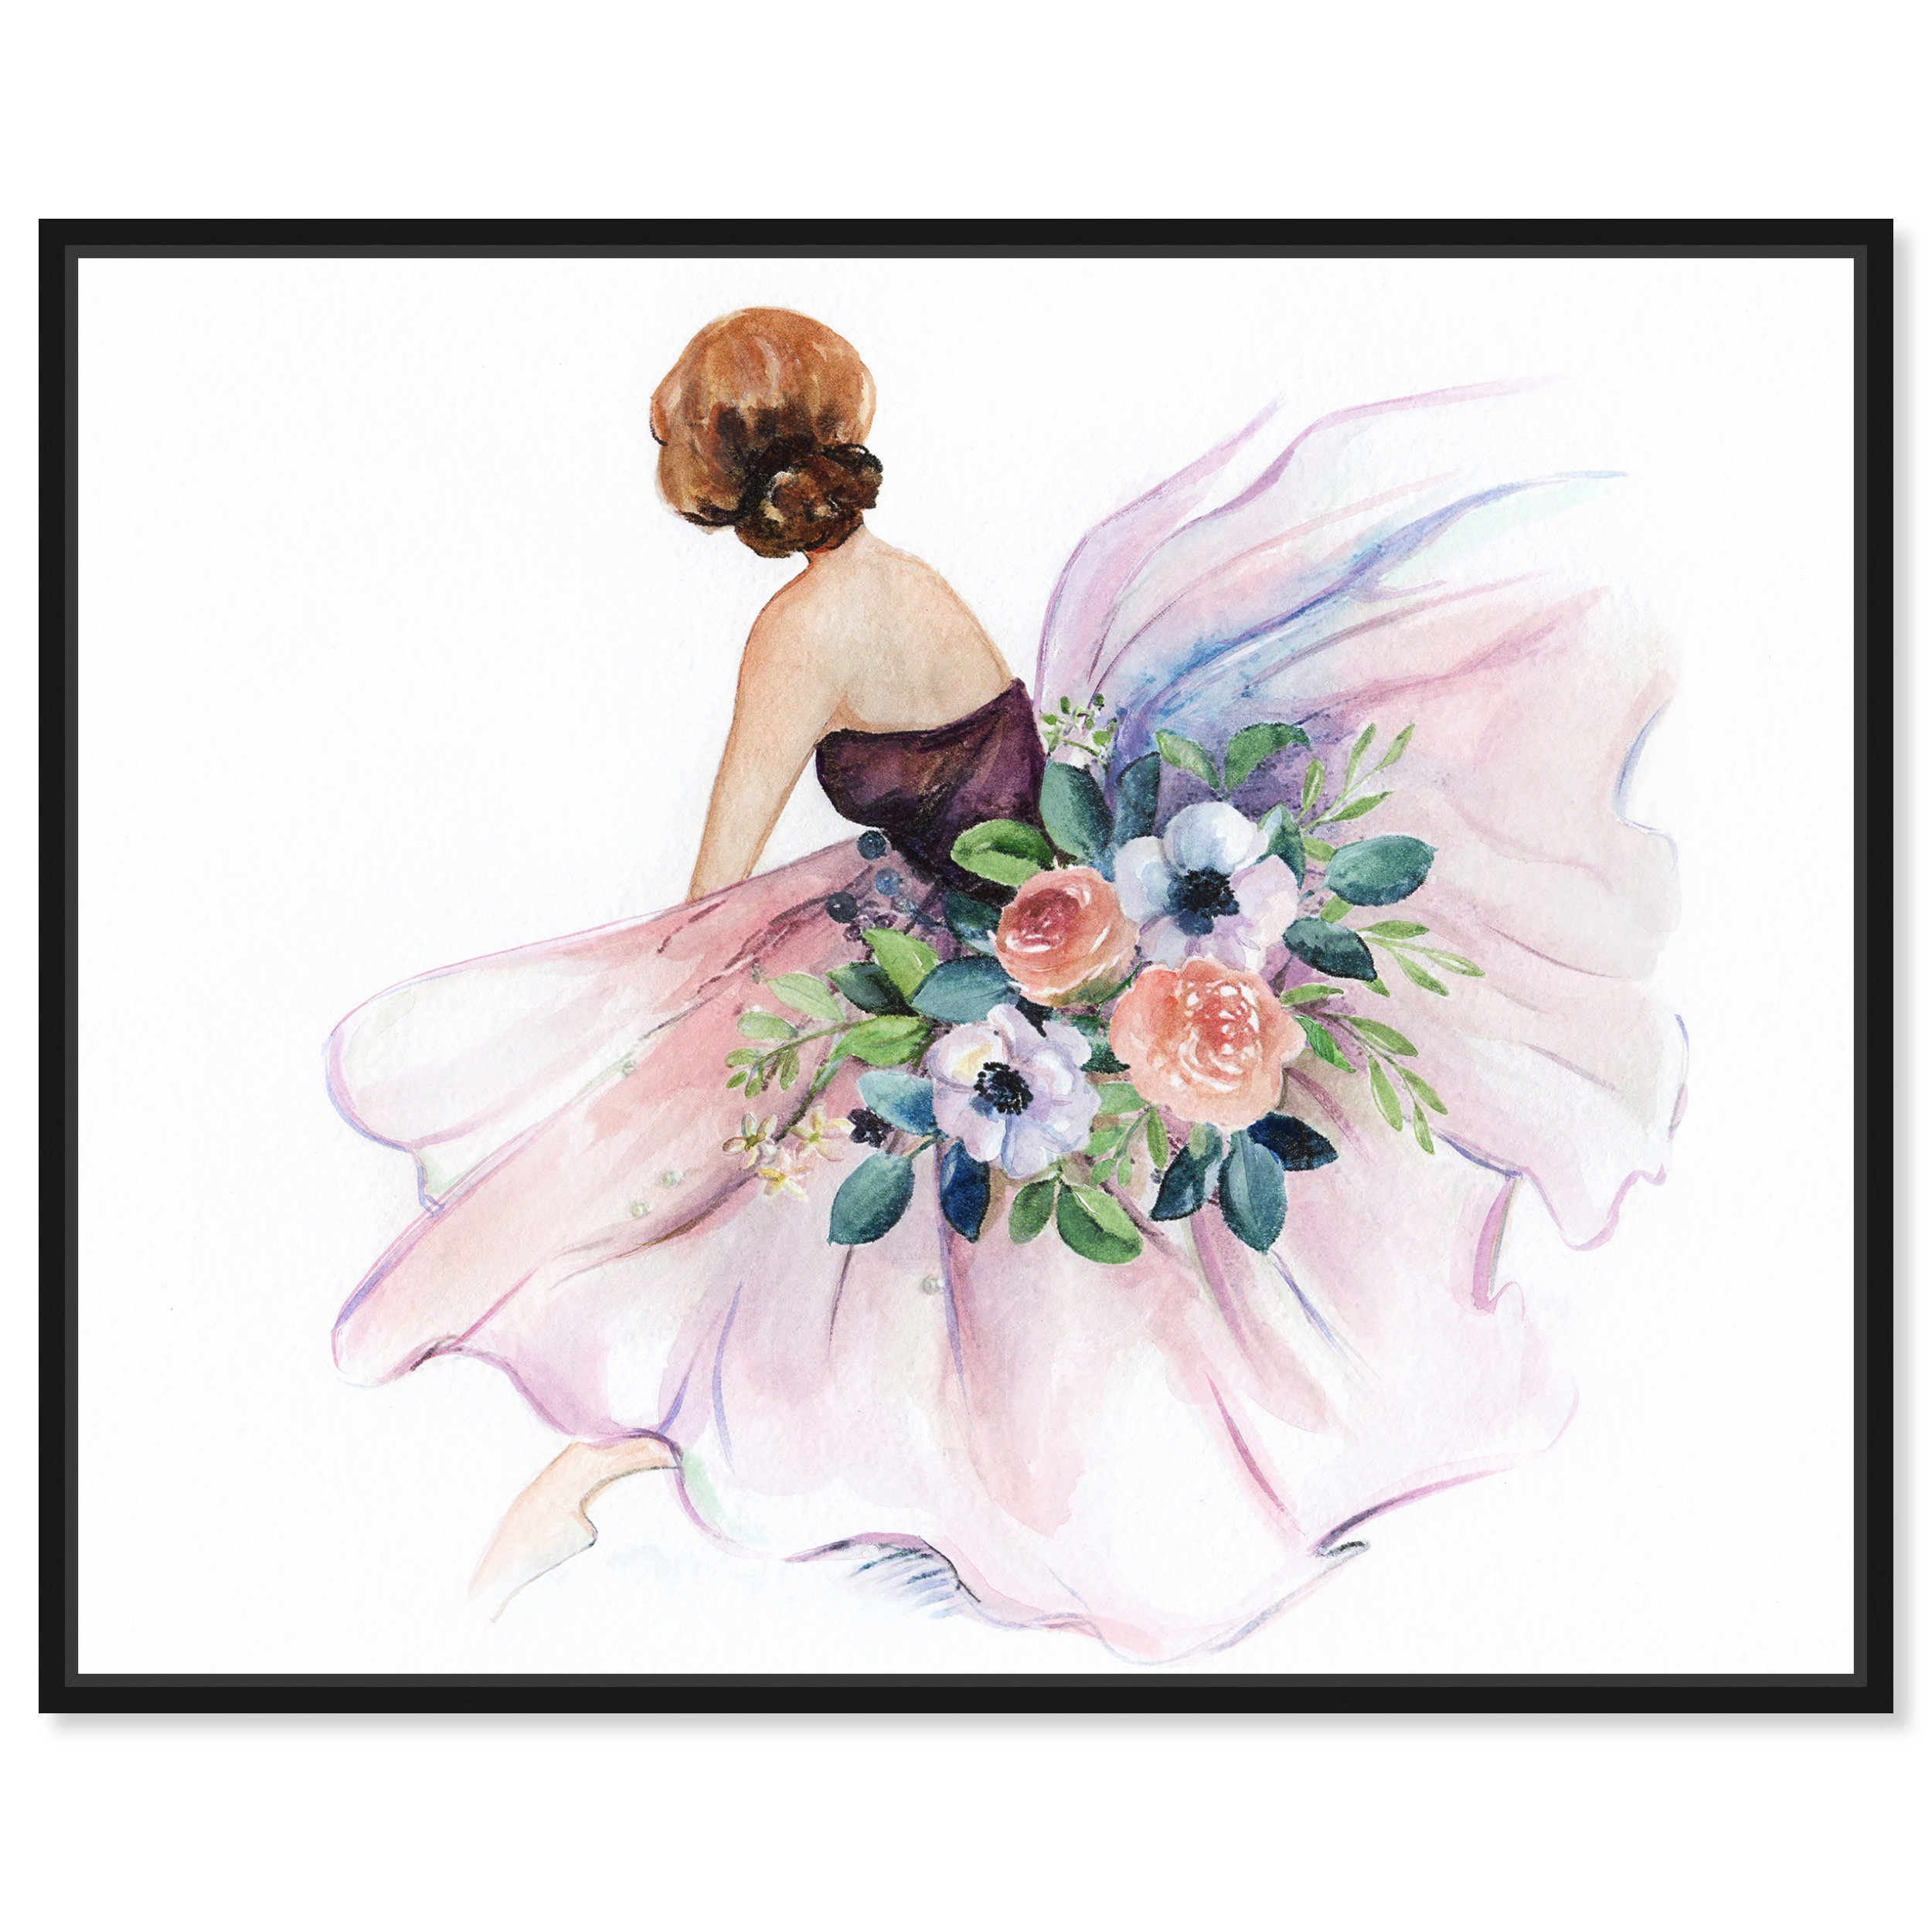 Glam Fashion Wall Art and Glam Fashion Wall Decor: The Ultimate